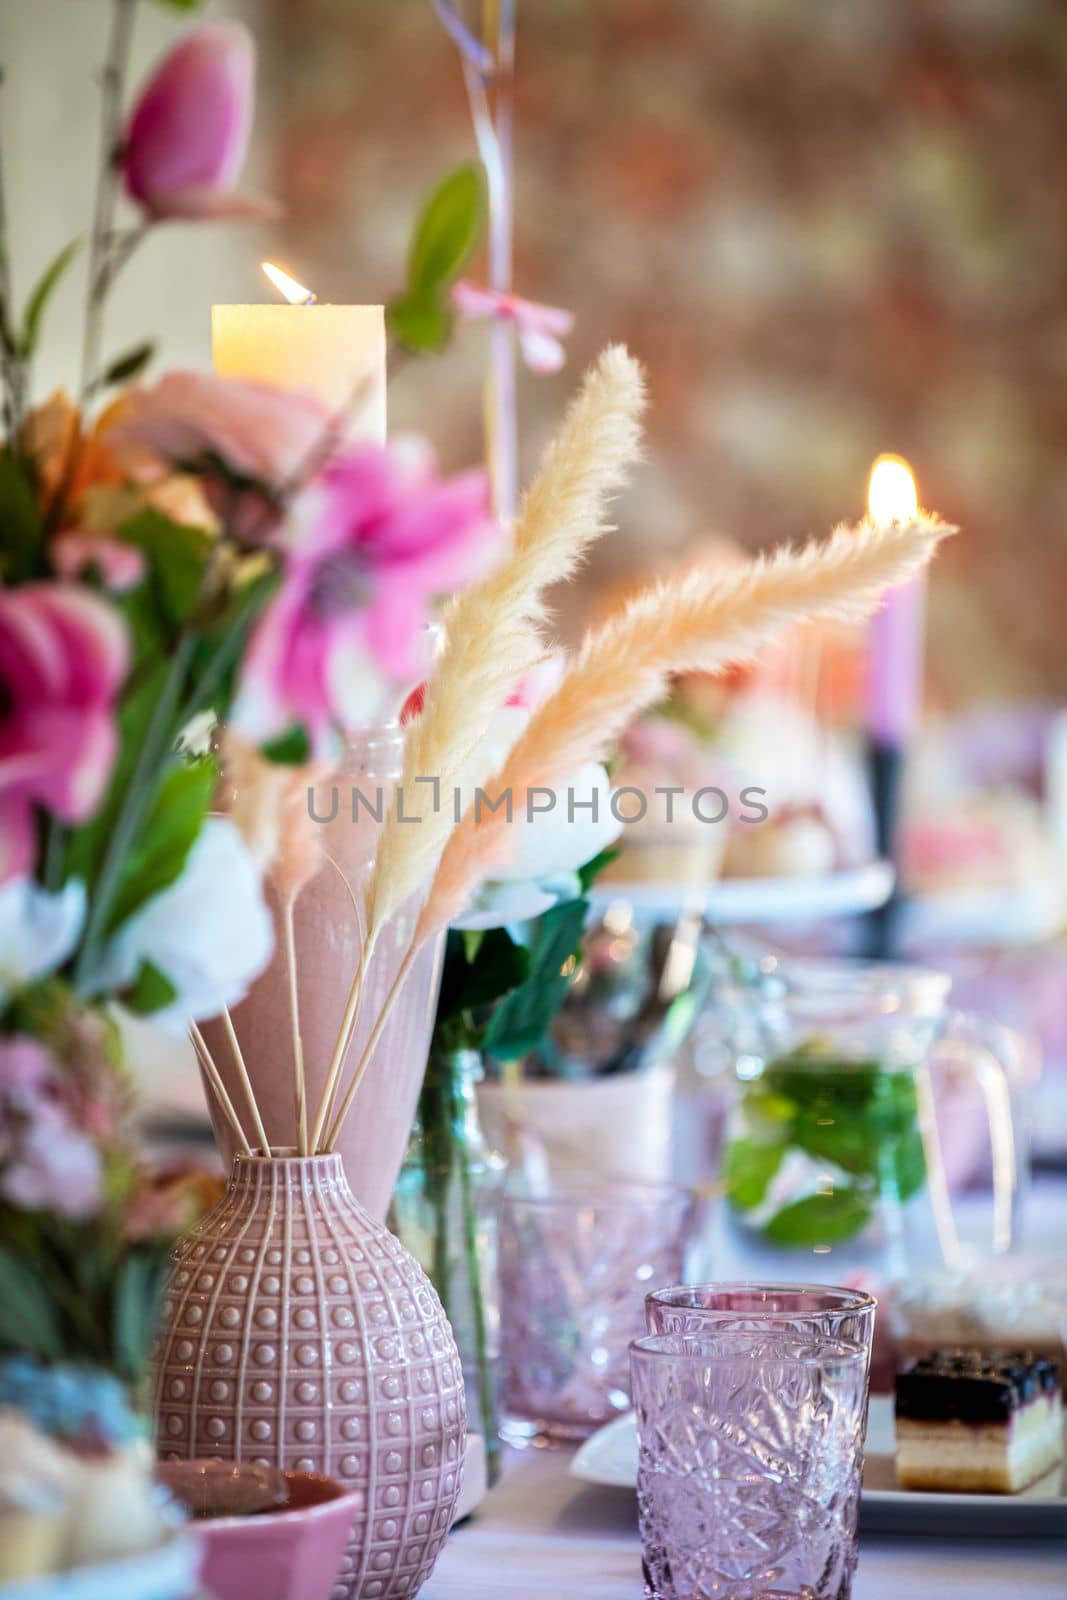 Table setting at a luxury wedding or party, babyshower, birthday and Beautiful flowers, cake,candles decortation on the table. High tea